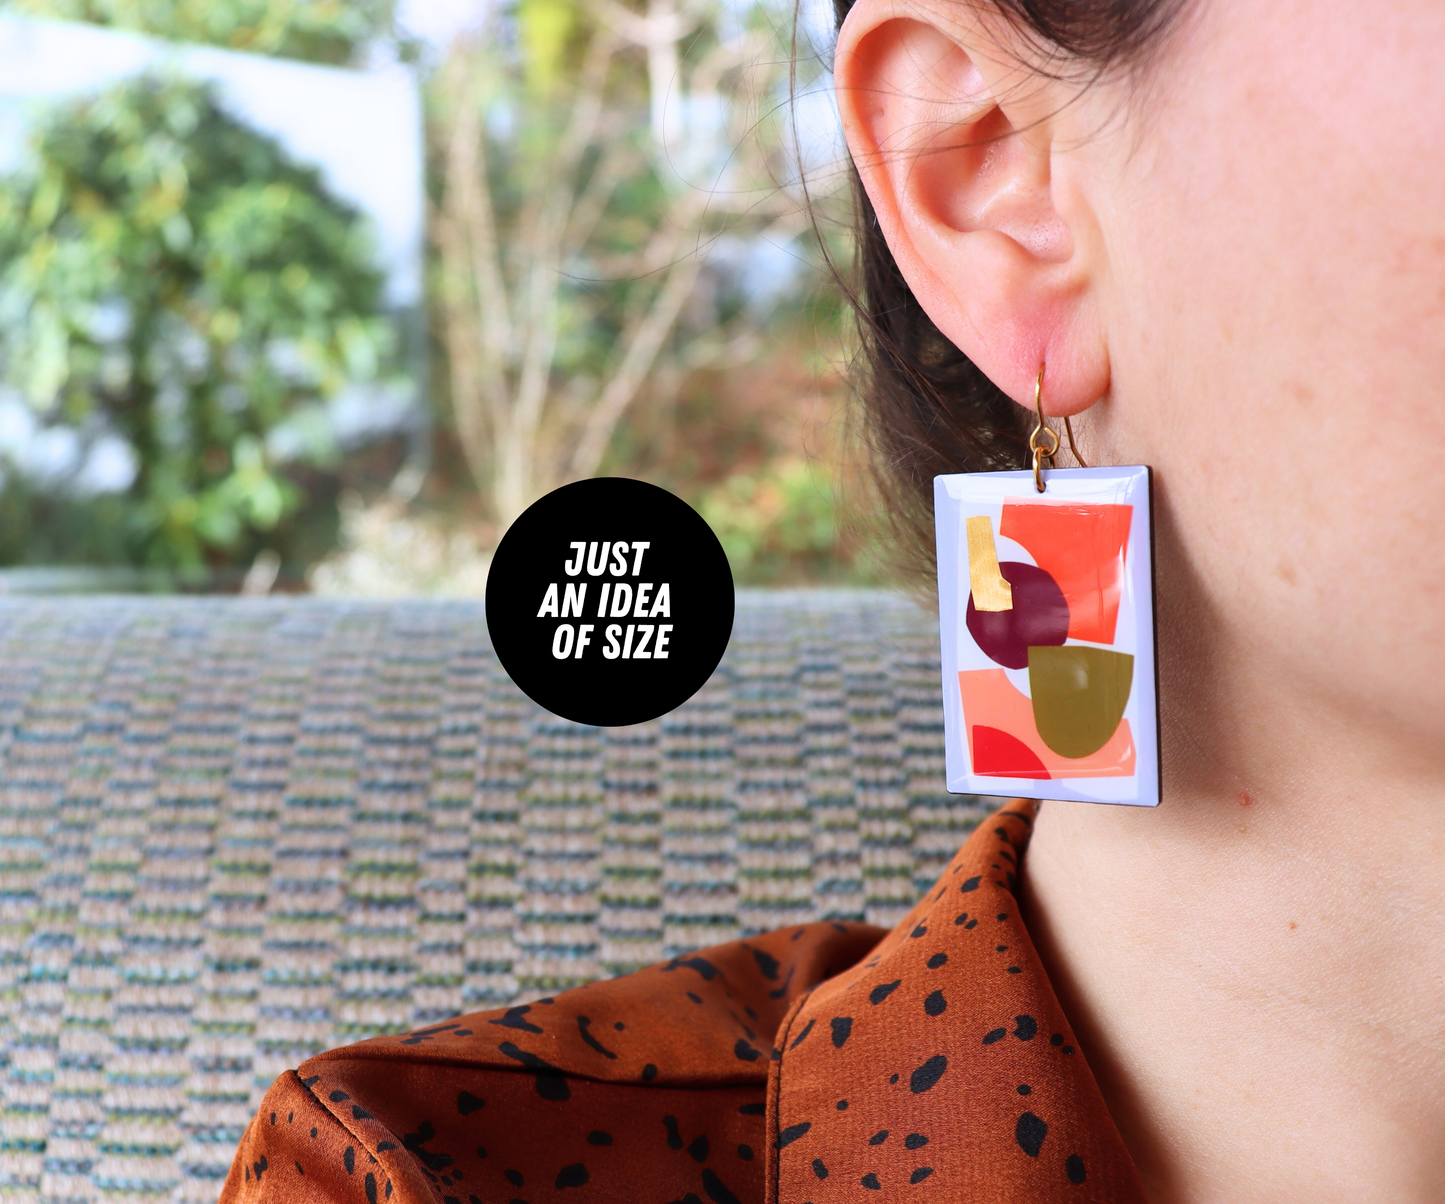 Collage abstraction with a touch of copper / contemporary upcycled vinyl earrings (F2)